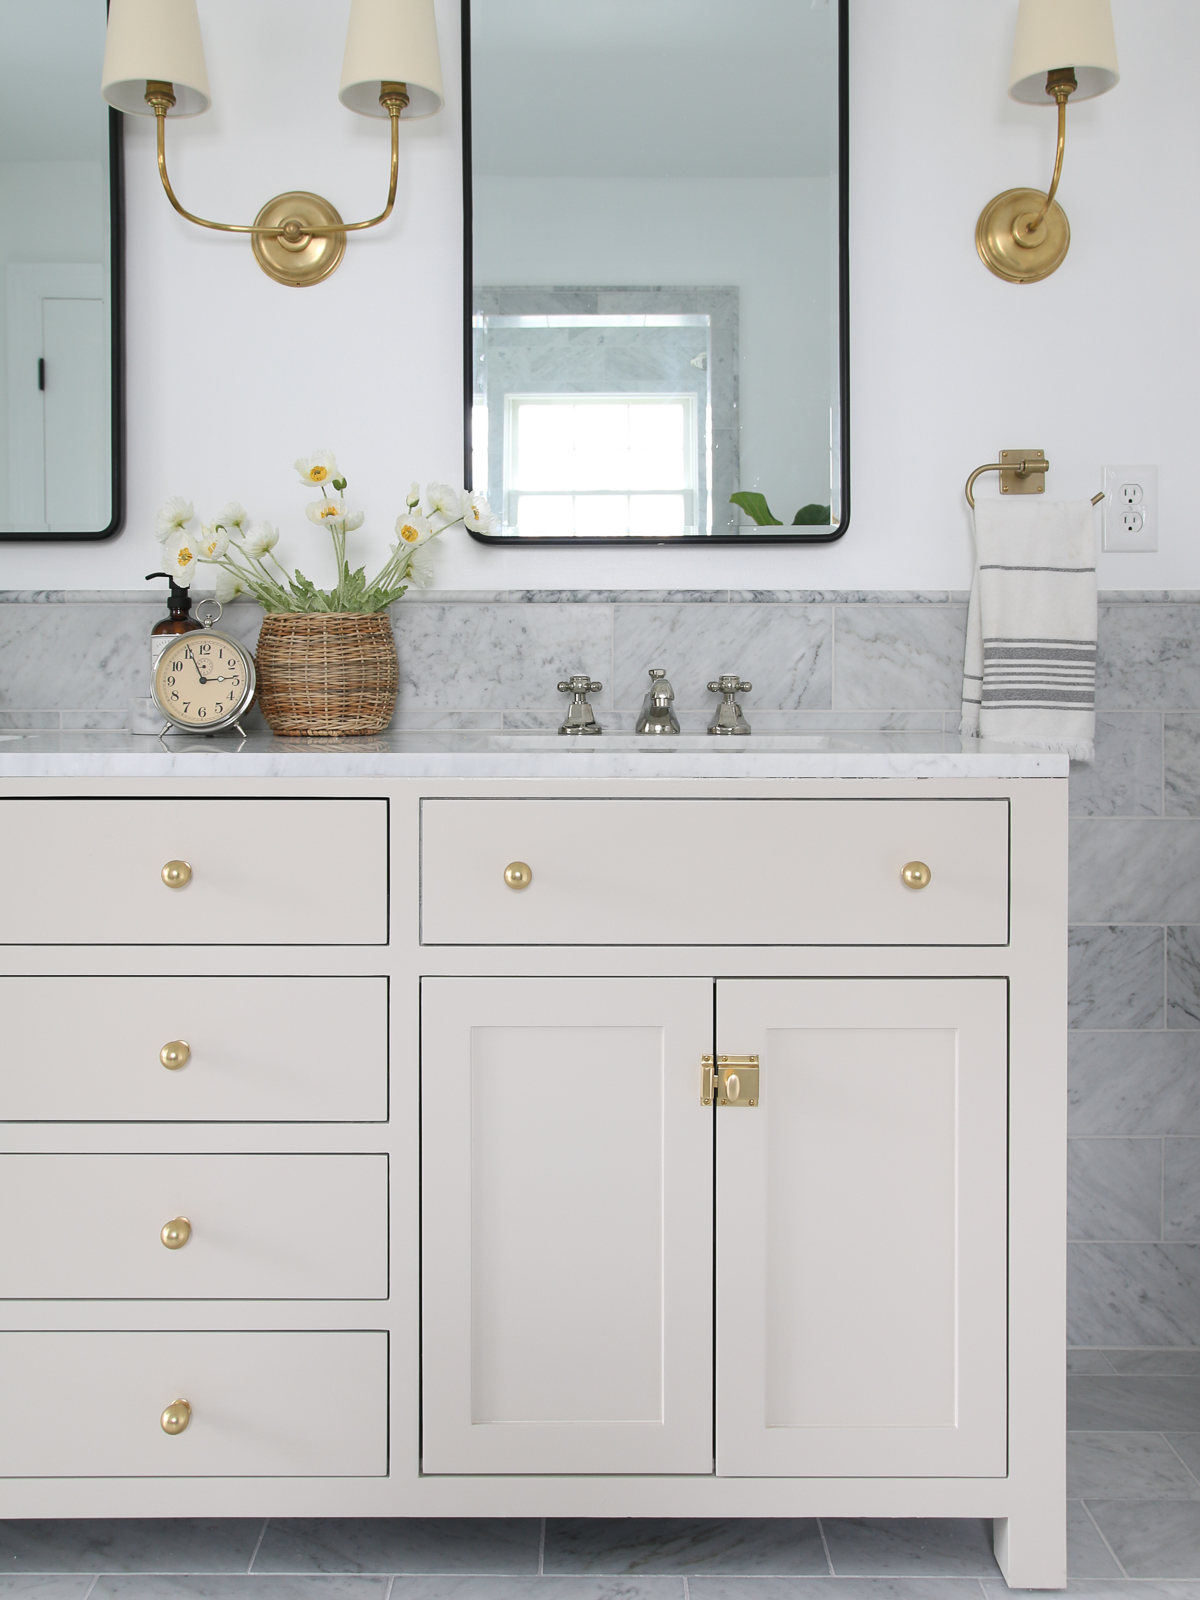 painted bathroom vanity cabinet in SW accessible beige with a basket of flowers on top. Black metal framed mirrors and brass sconces. Marble tile wainscoting on walls